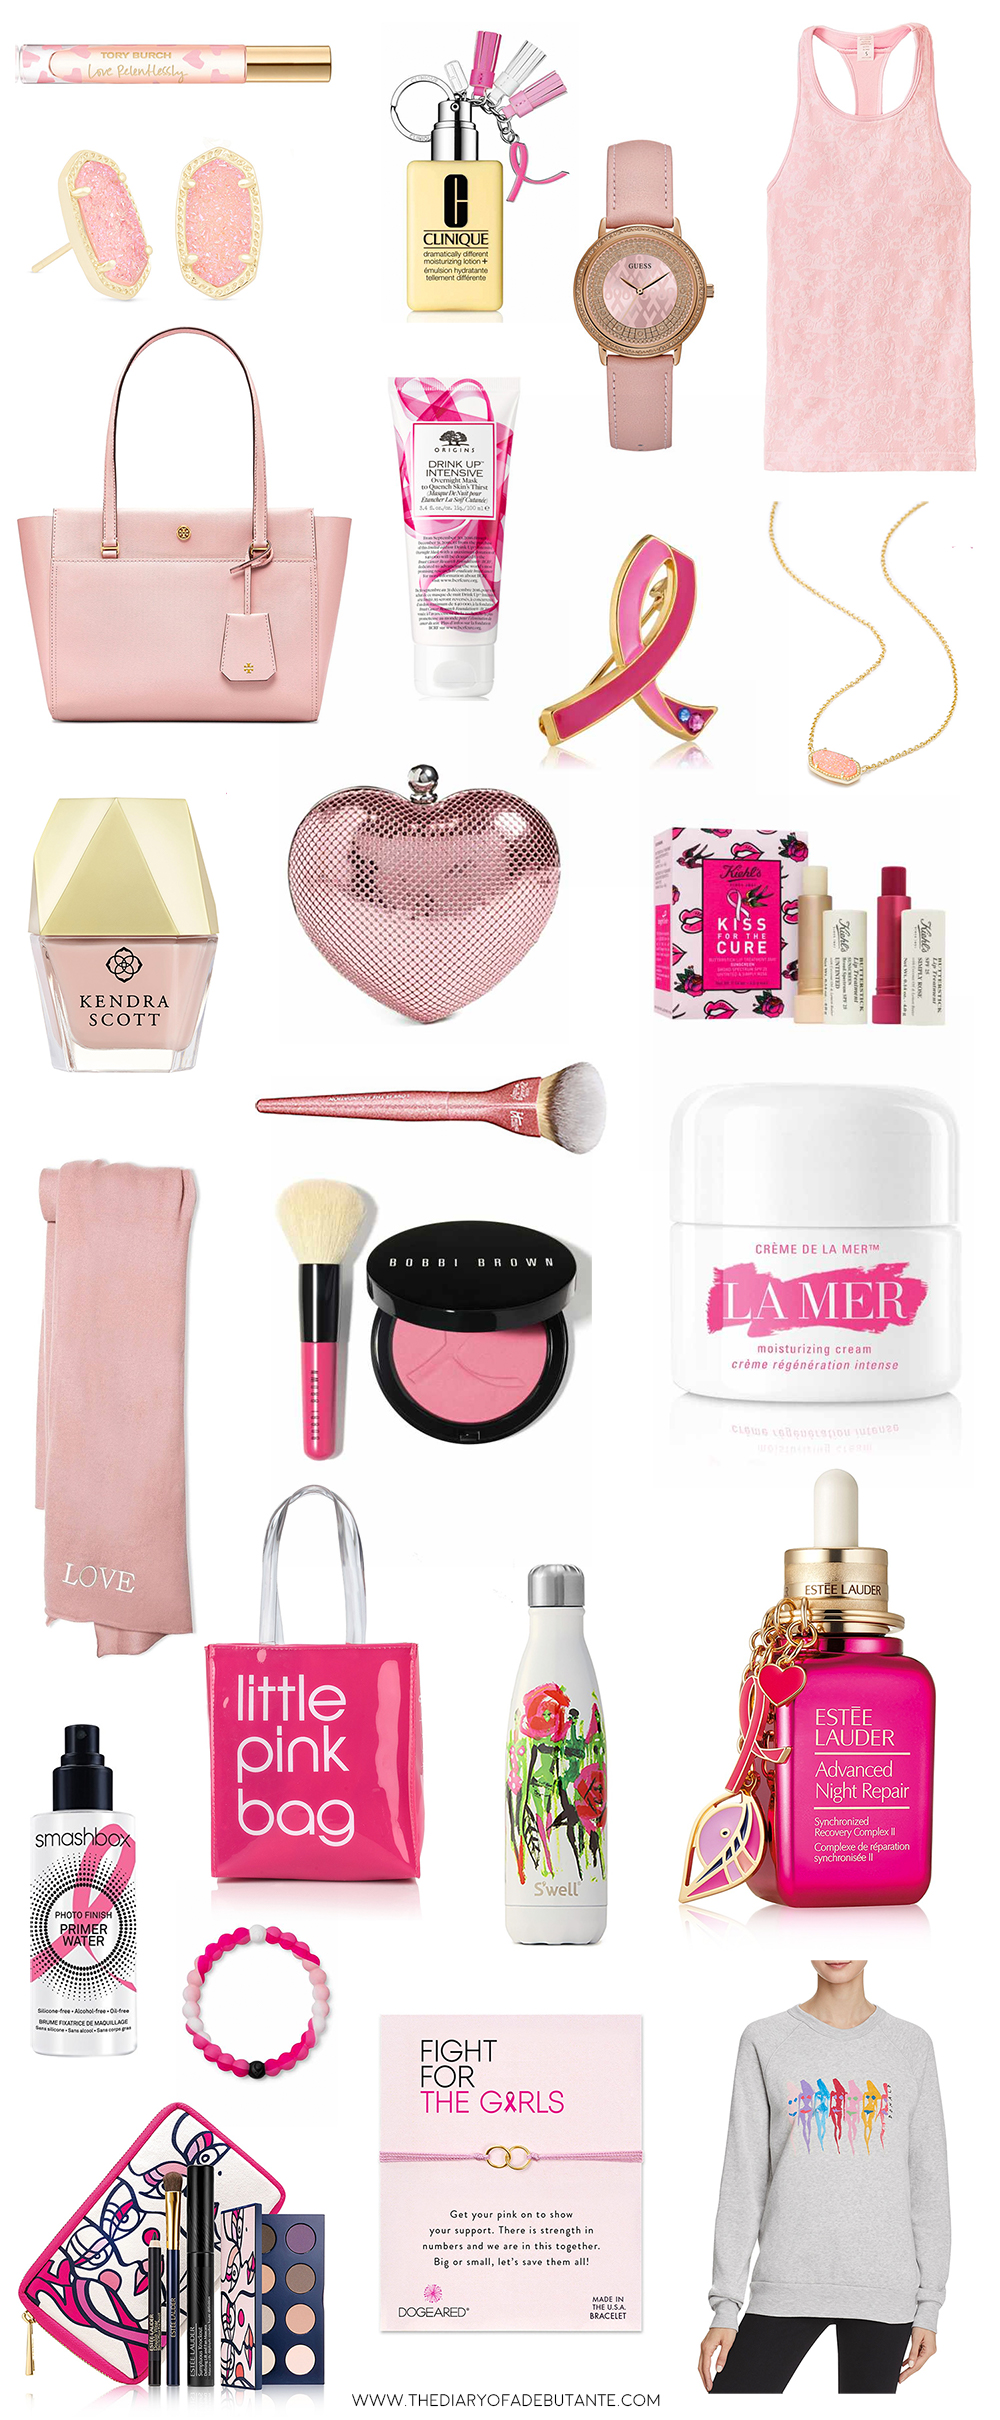 24 items you can purchase to help support breast cancer awareness and research this October | 2017 Breast Cancer Awareness Products by southern blogger Stephanie Ziajka from Diary of a Debutante